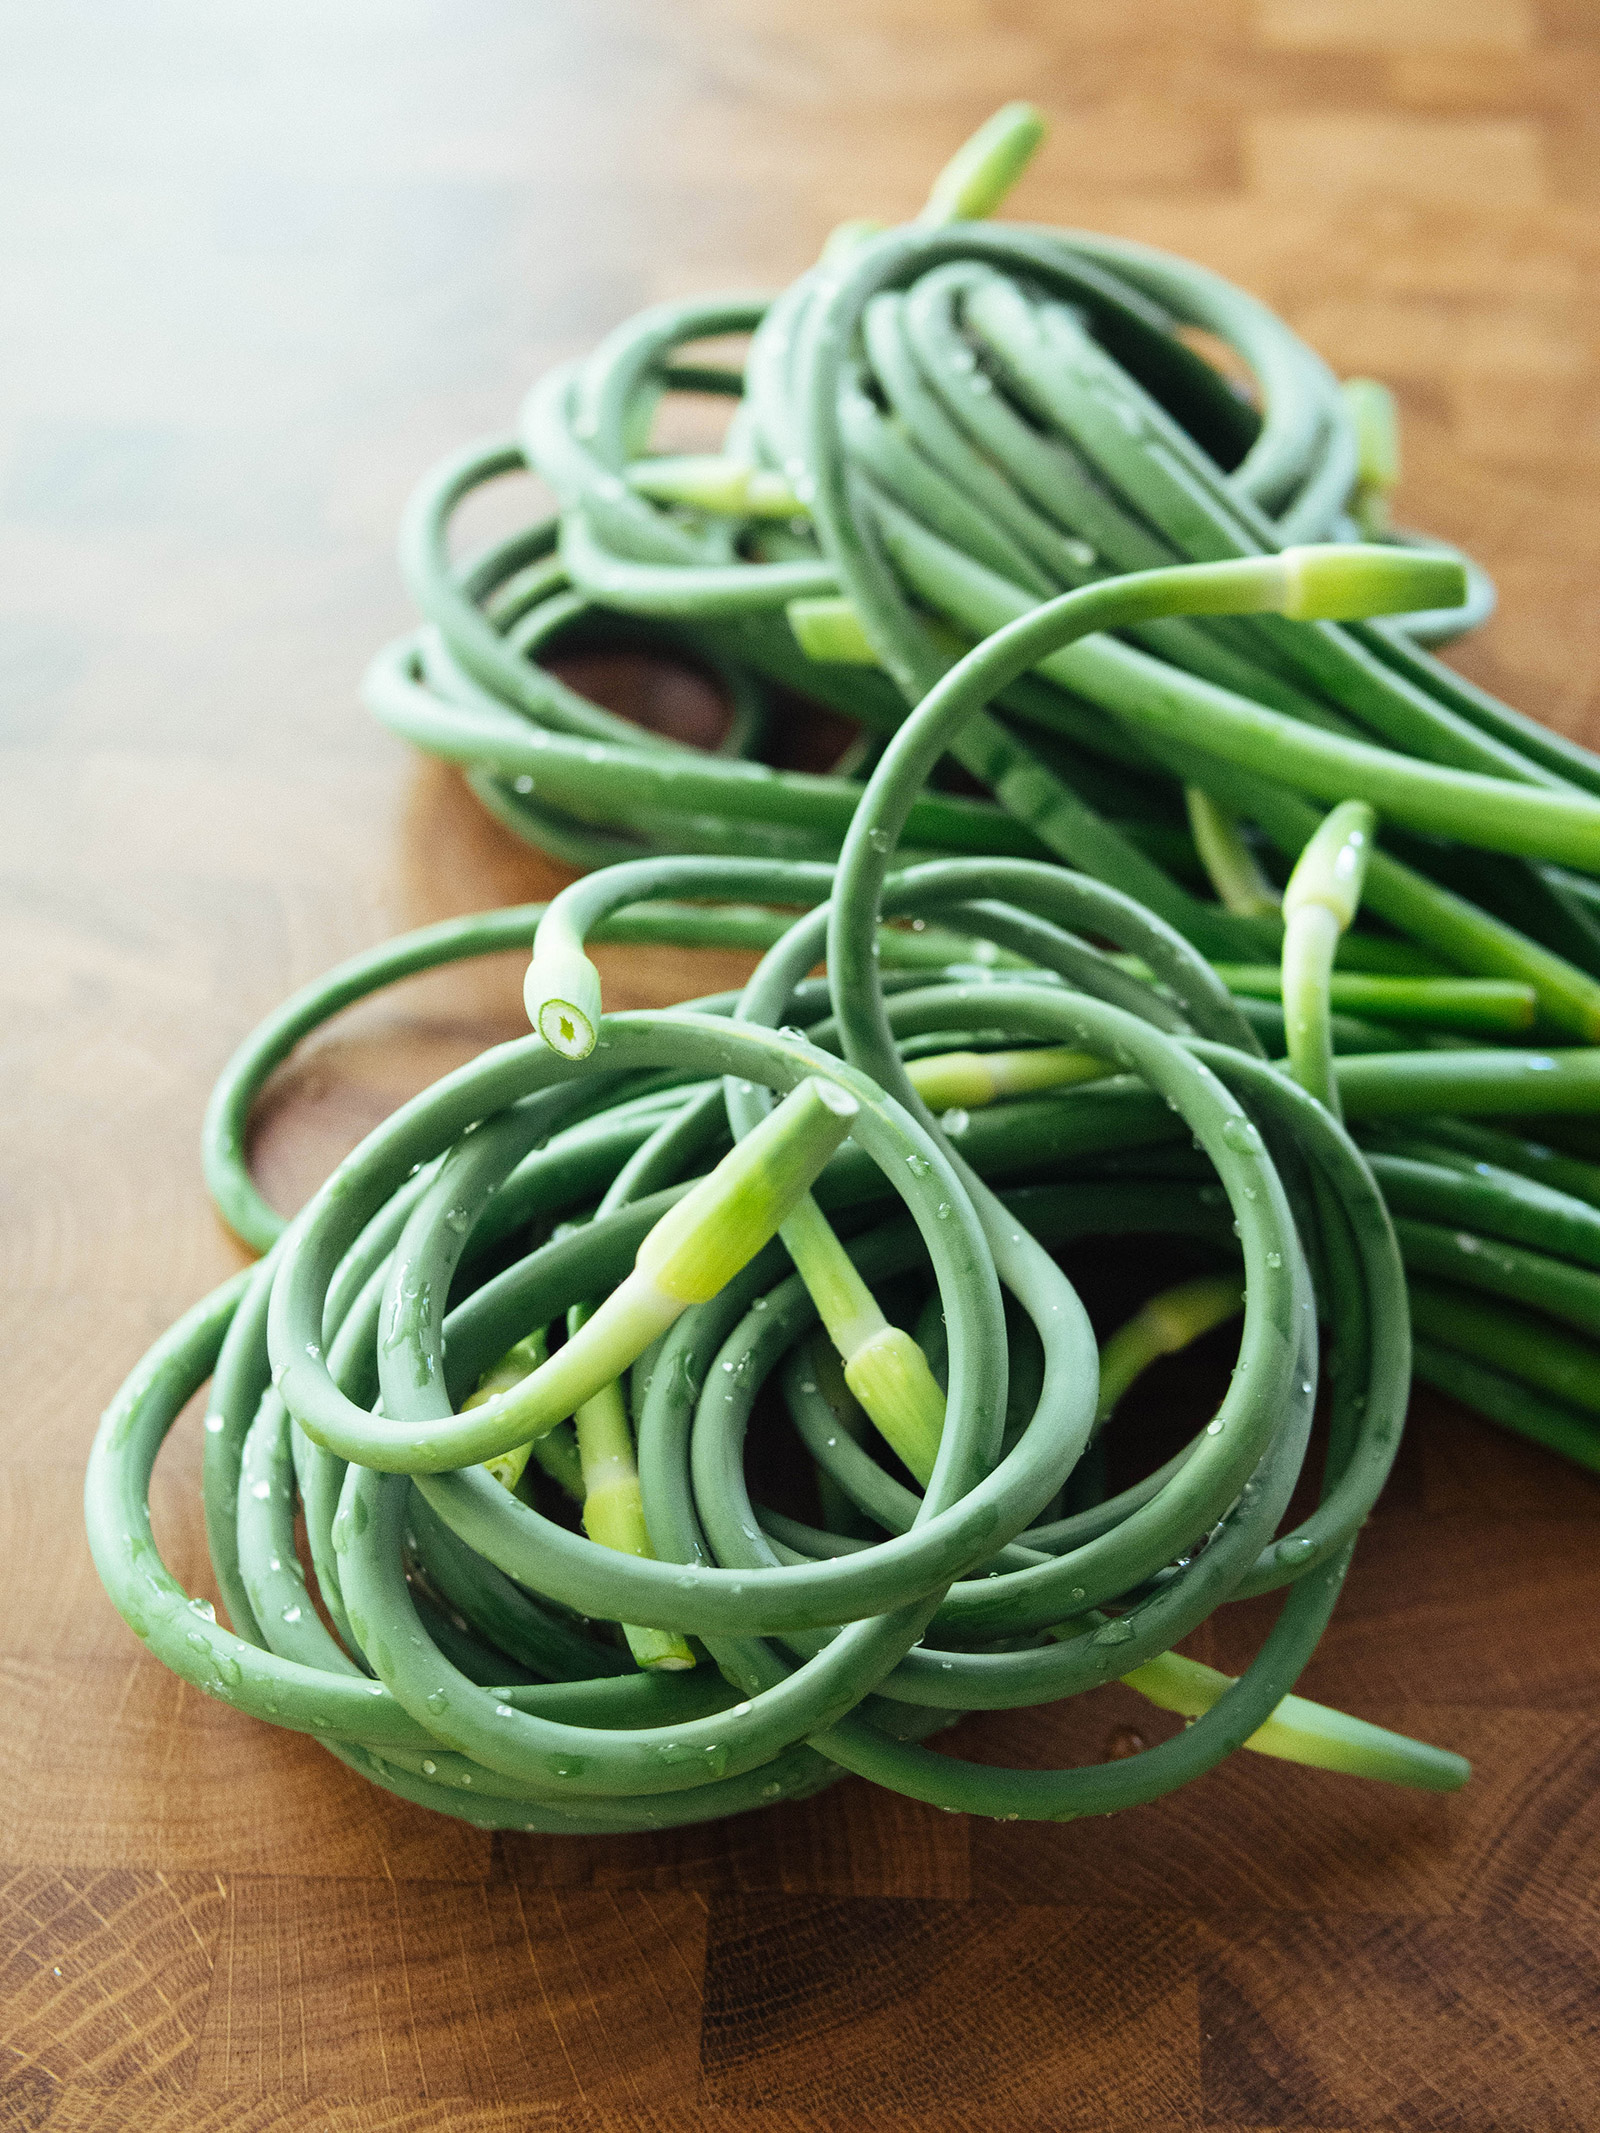 How and when to harvest garlic scapes